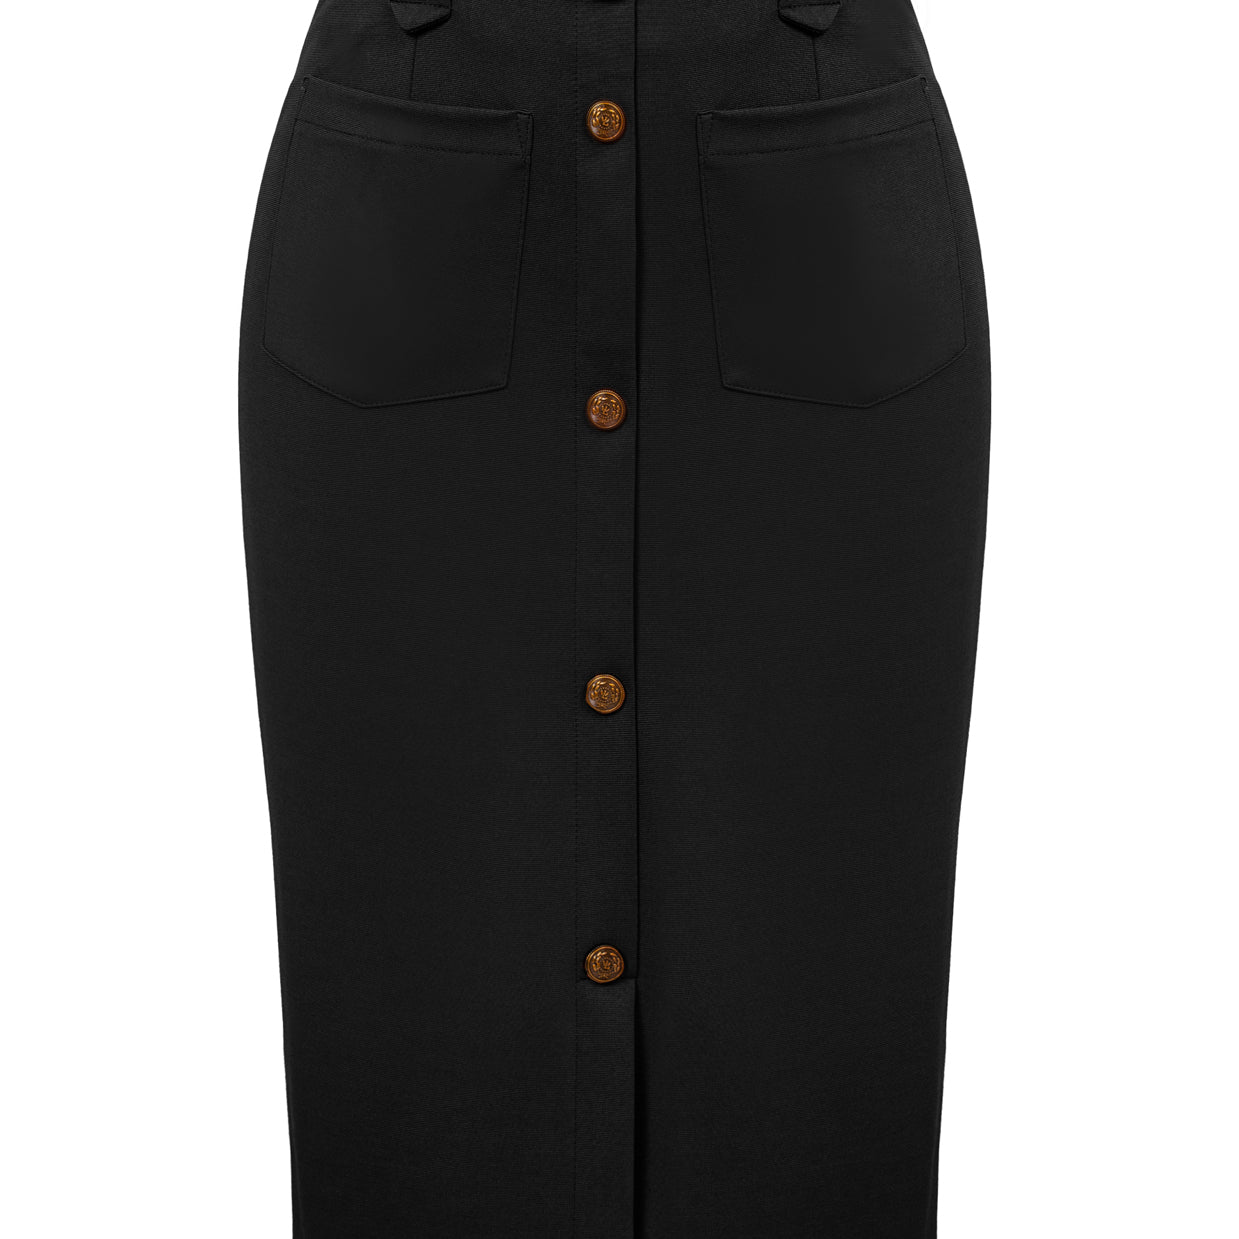 Seckill Offer⌛Pencil Skirt Knee Length High Waisted 1950s Vintage Office Work Bodycon Skirt with Pockets